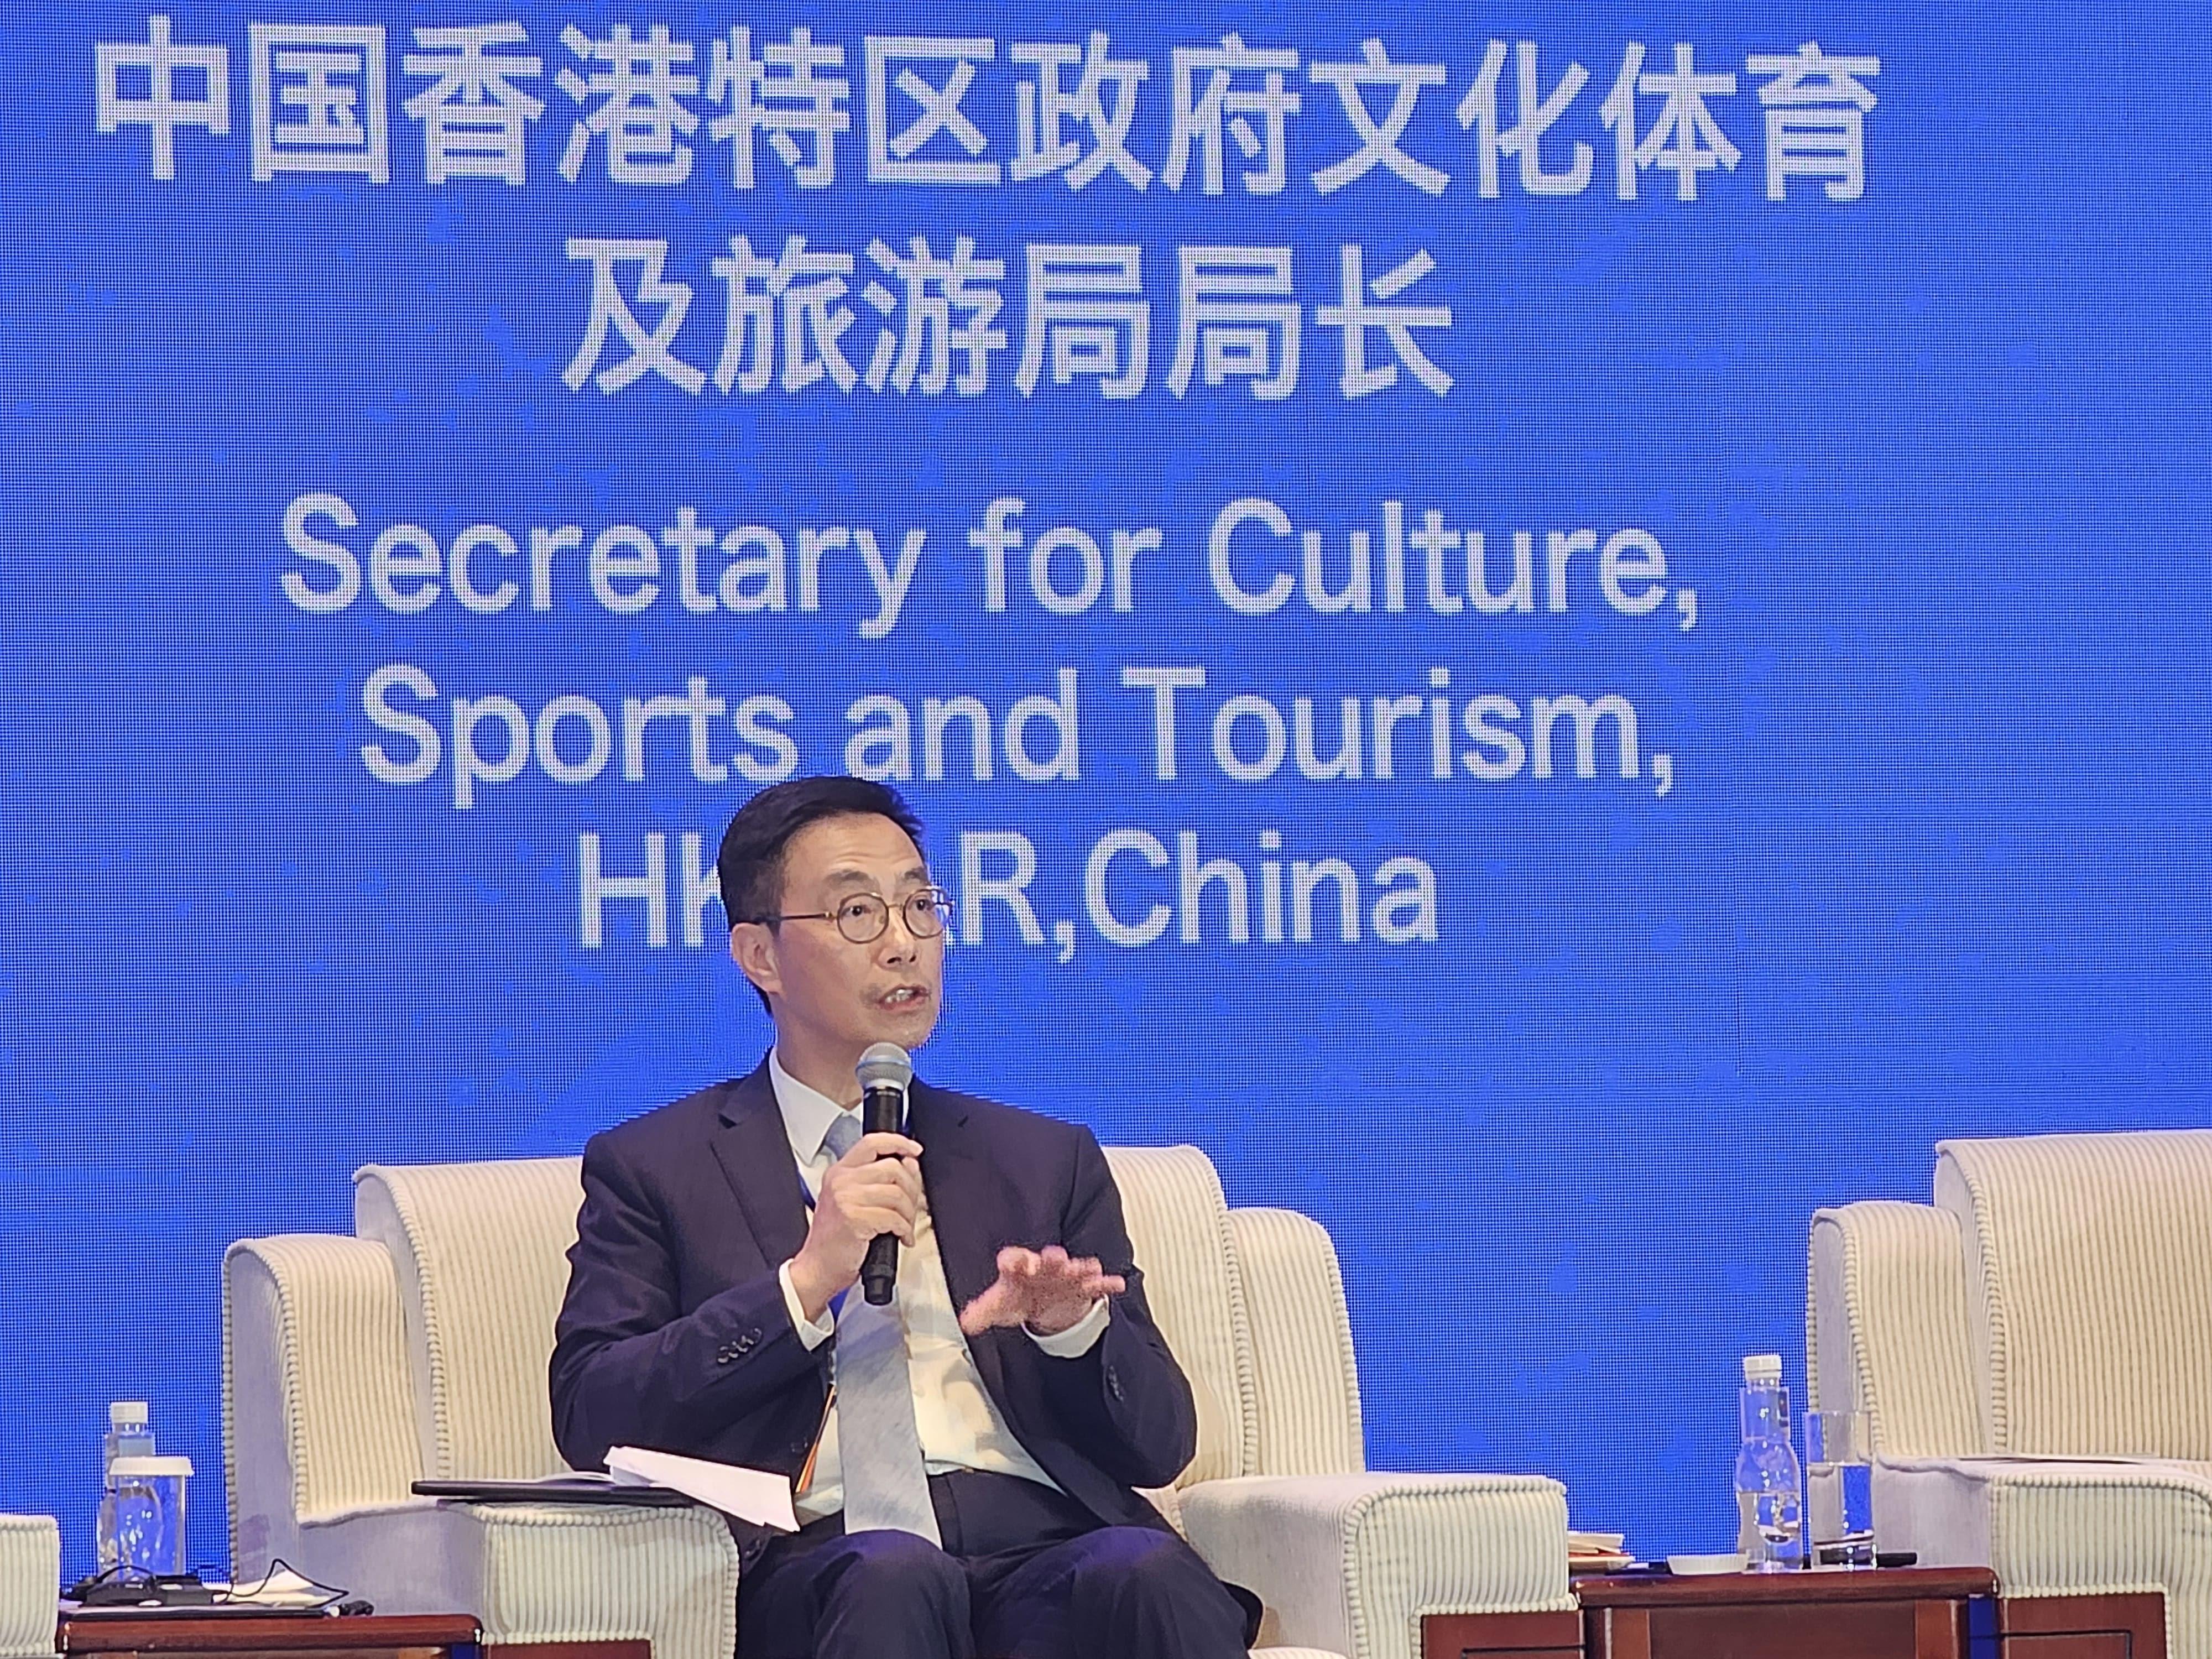 The Secretary for Culture, Sports and Tourism, Mr Kevin Yeung, attended the 14th China-U.S. Tourism Leadership Summit in Xi'an today (May 22) at the invitation of the Ministry of Culture and Tourism. Photo shows Mr Yeung speaking at a panel discussion.